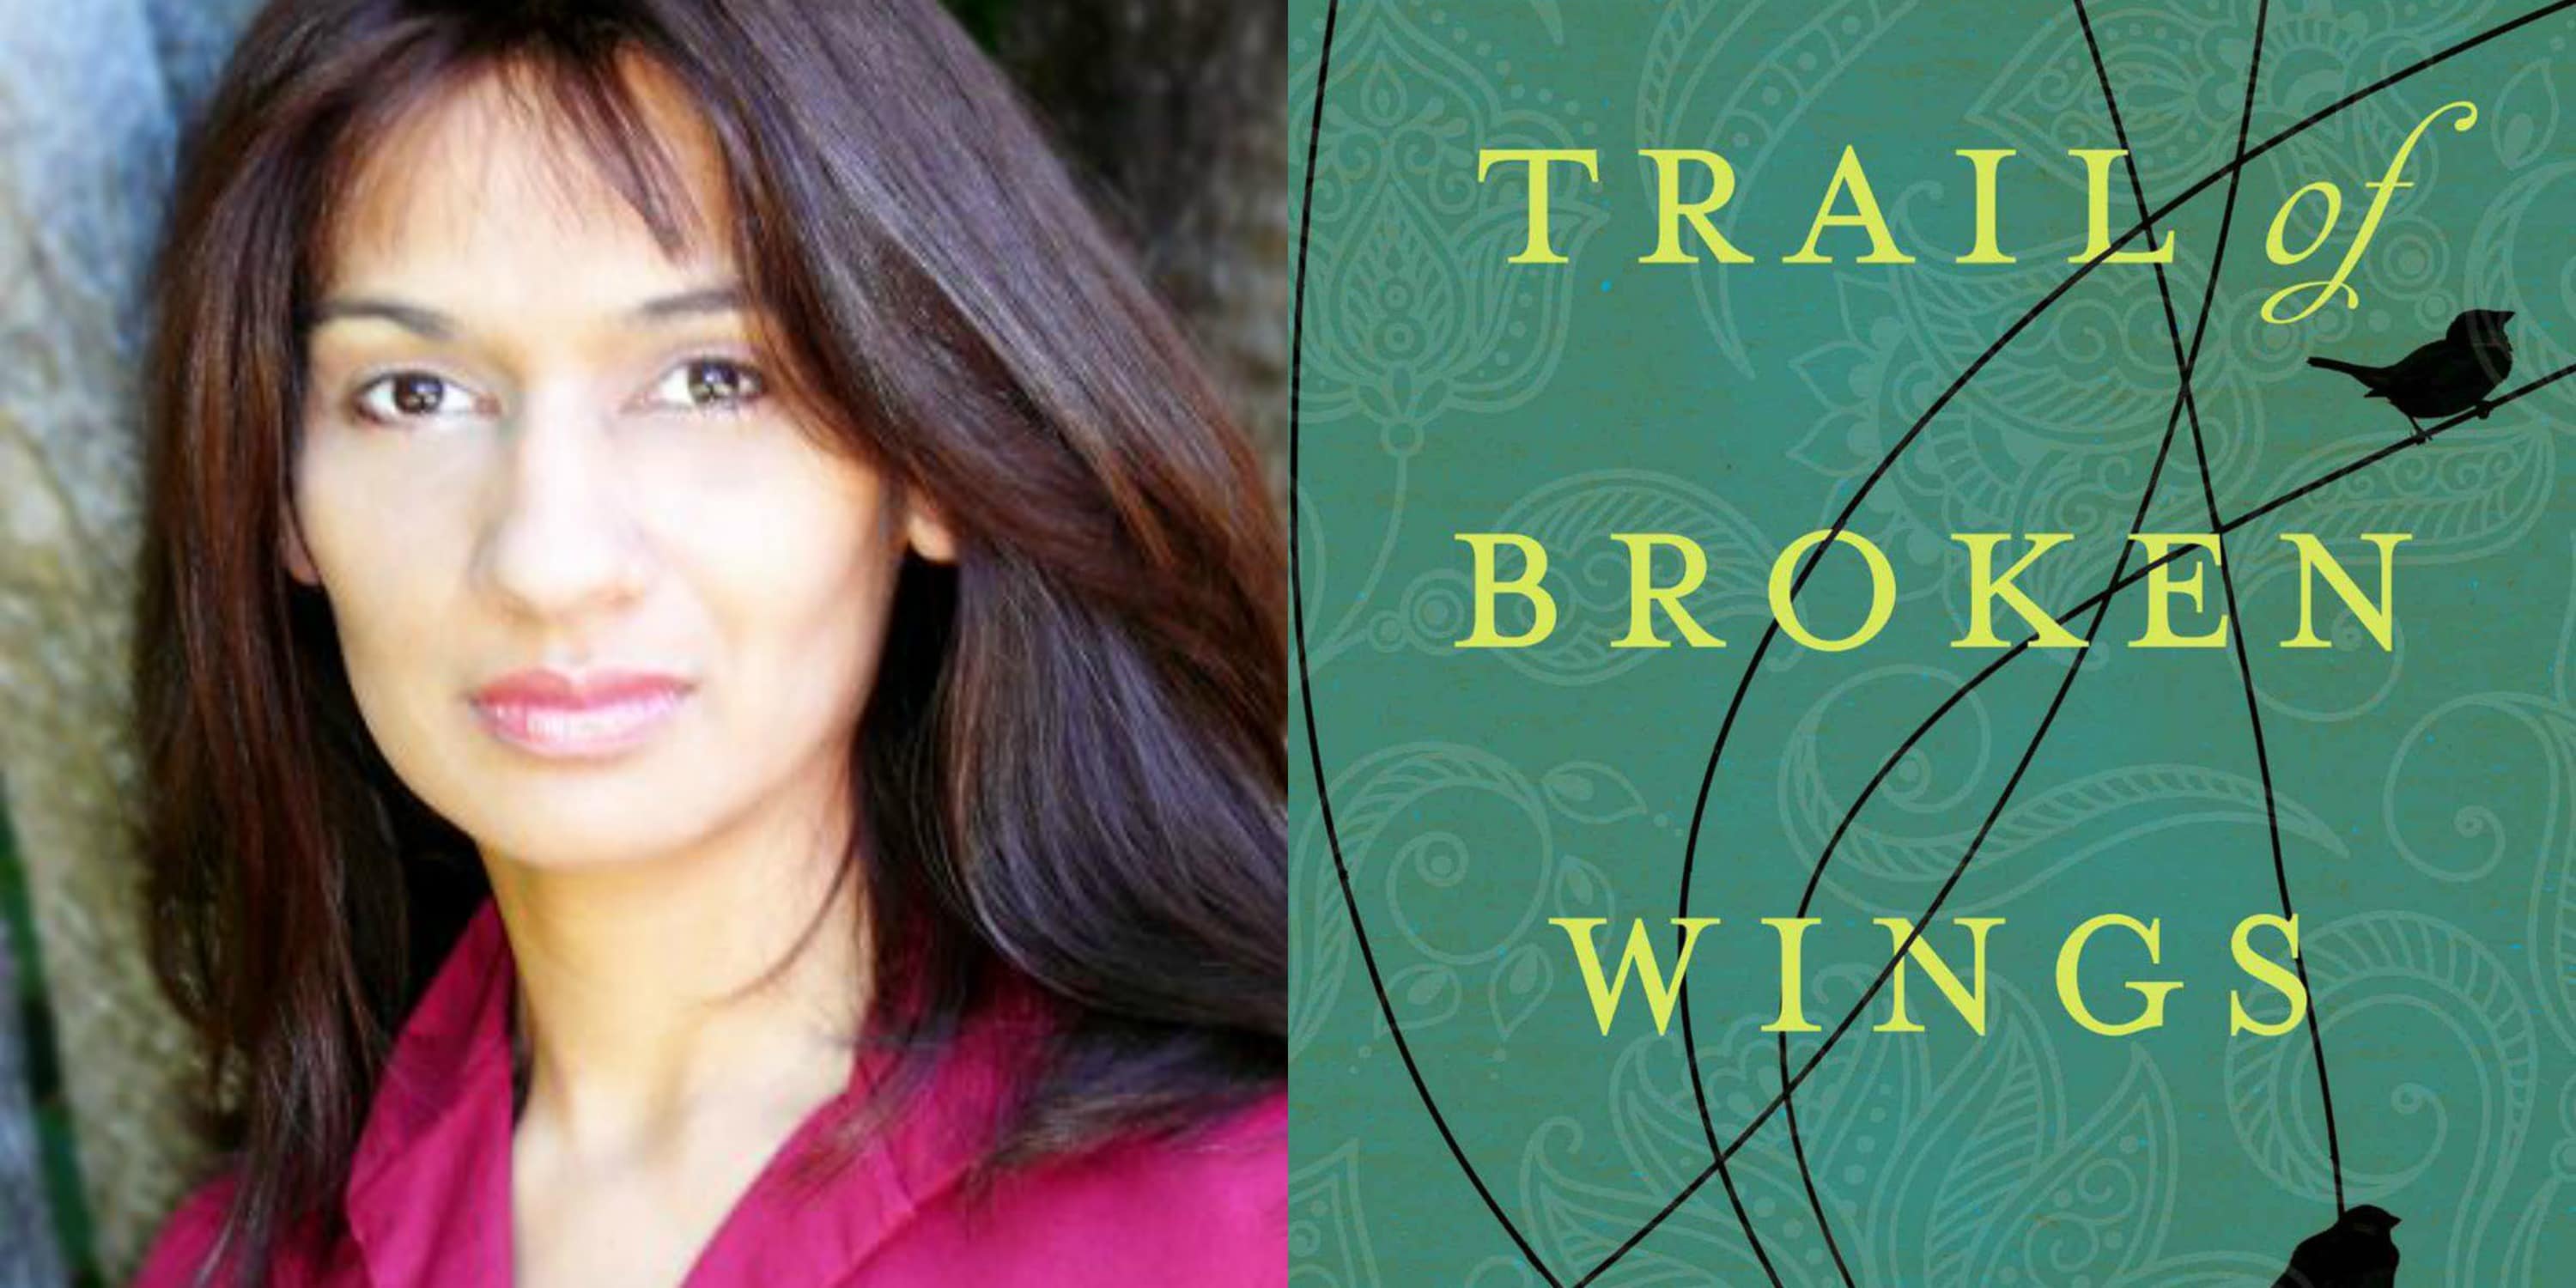 Sundays With Writers: Trail of Broken Wings by Sejal Badani